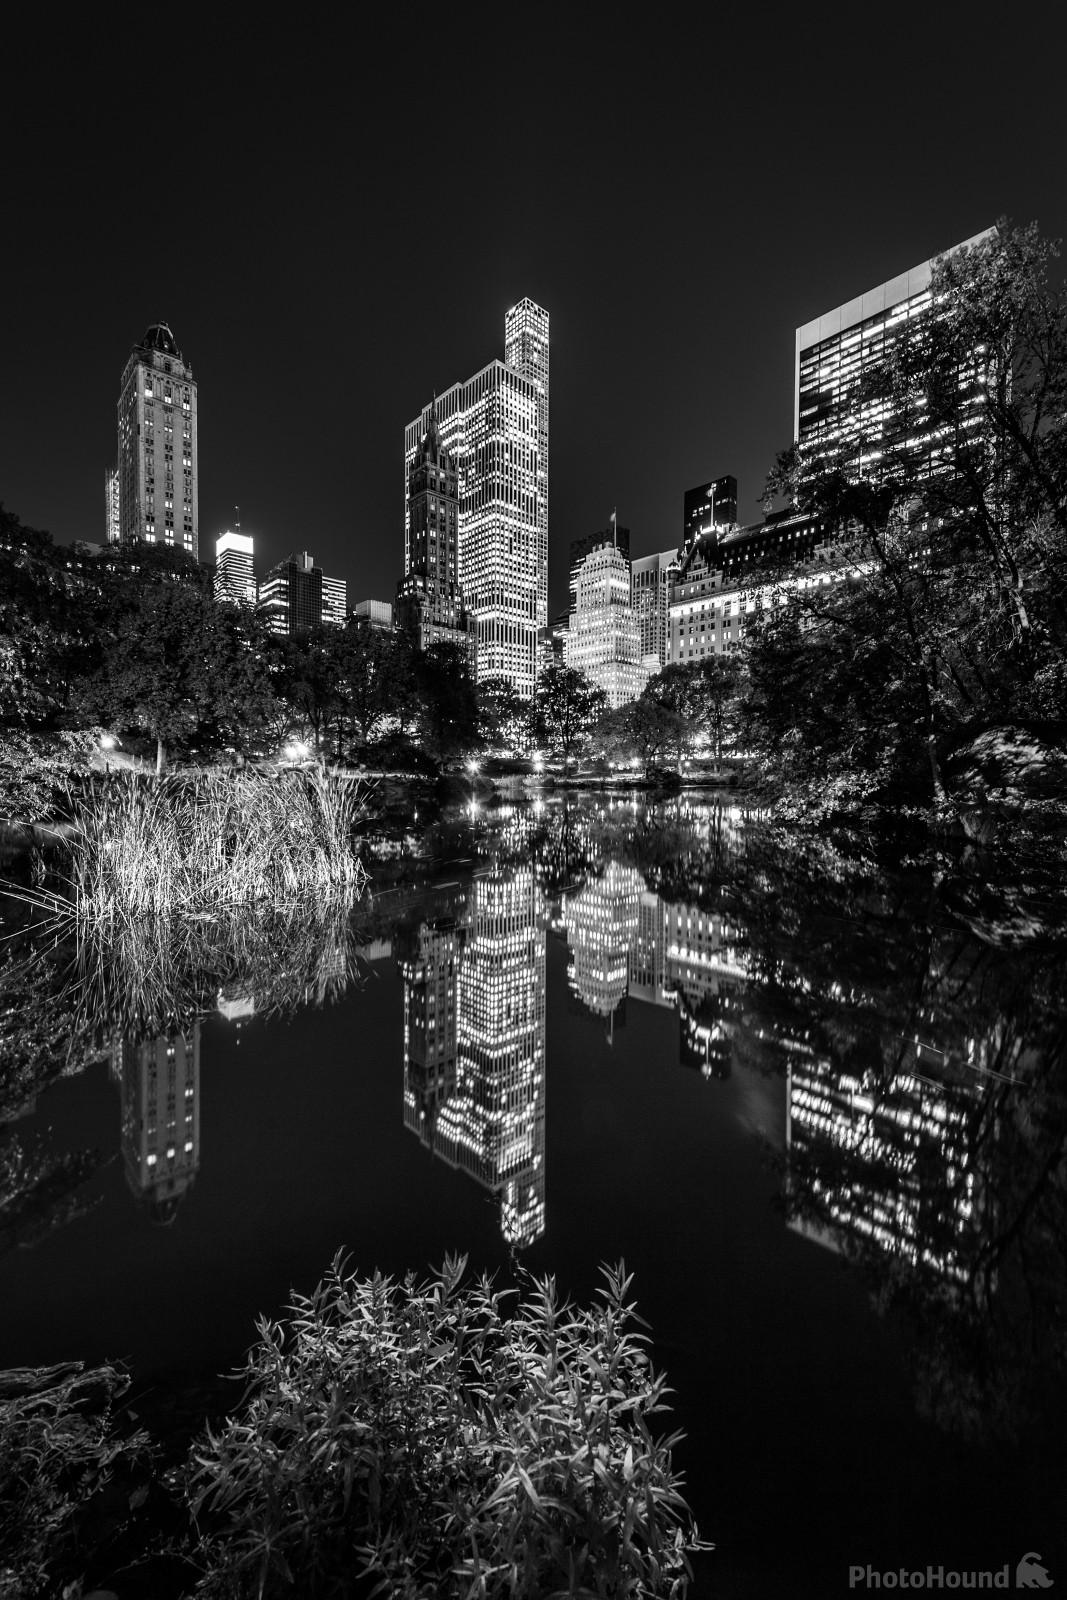 Image of Central Park - W 59th Street by VOJTa Herout